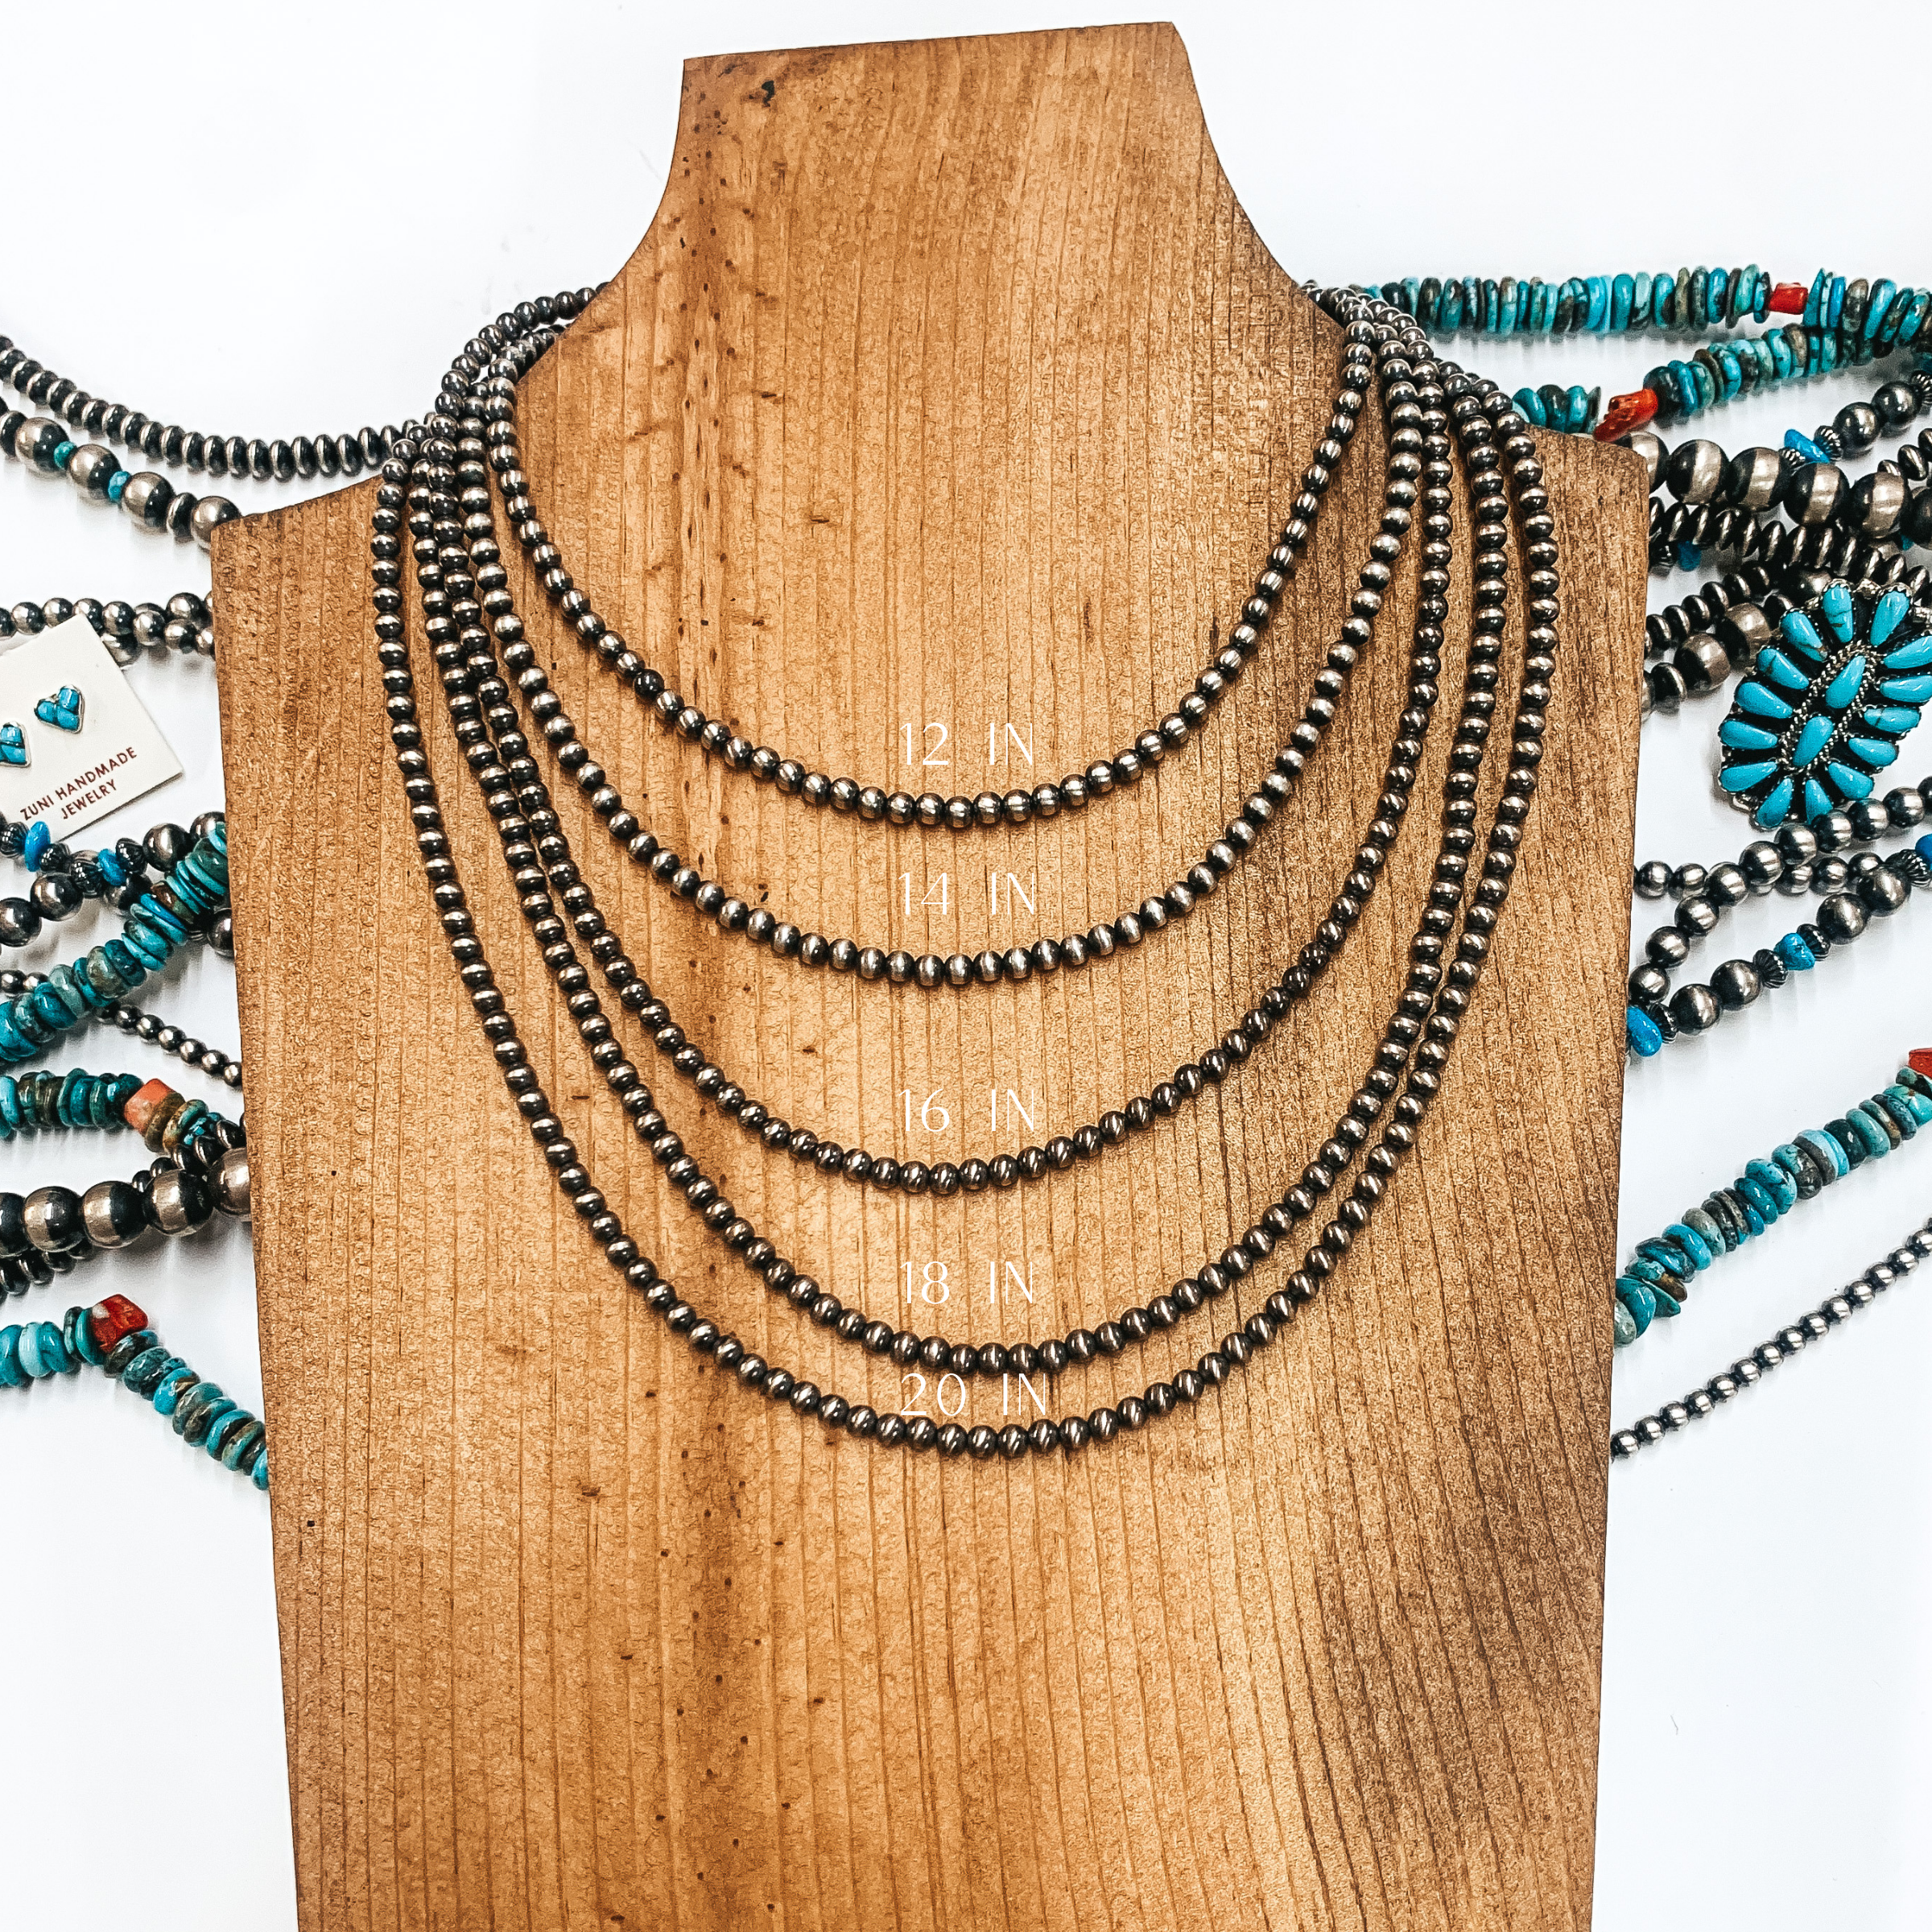 Navajo | Navajo Handmade 4mm Navajo Pearls Necklace | Varying Lengths - Giddy Up Glamour Boutique